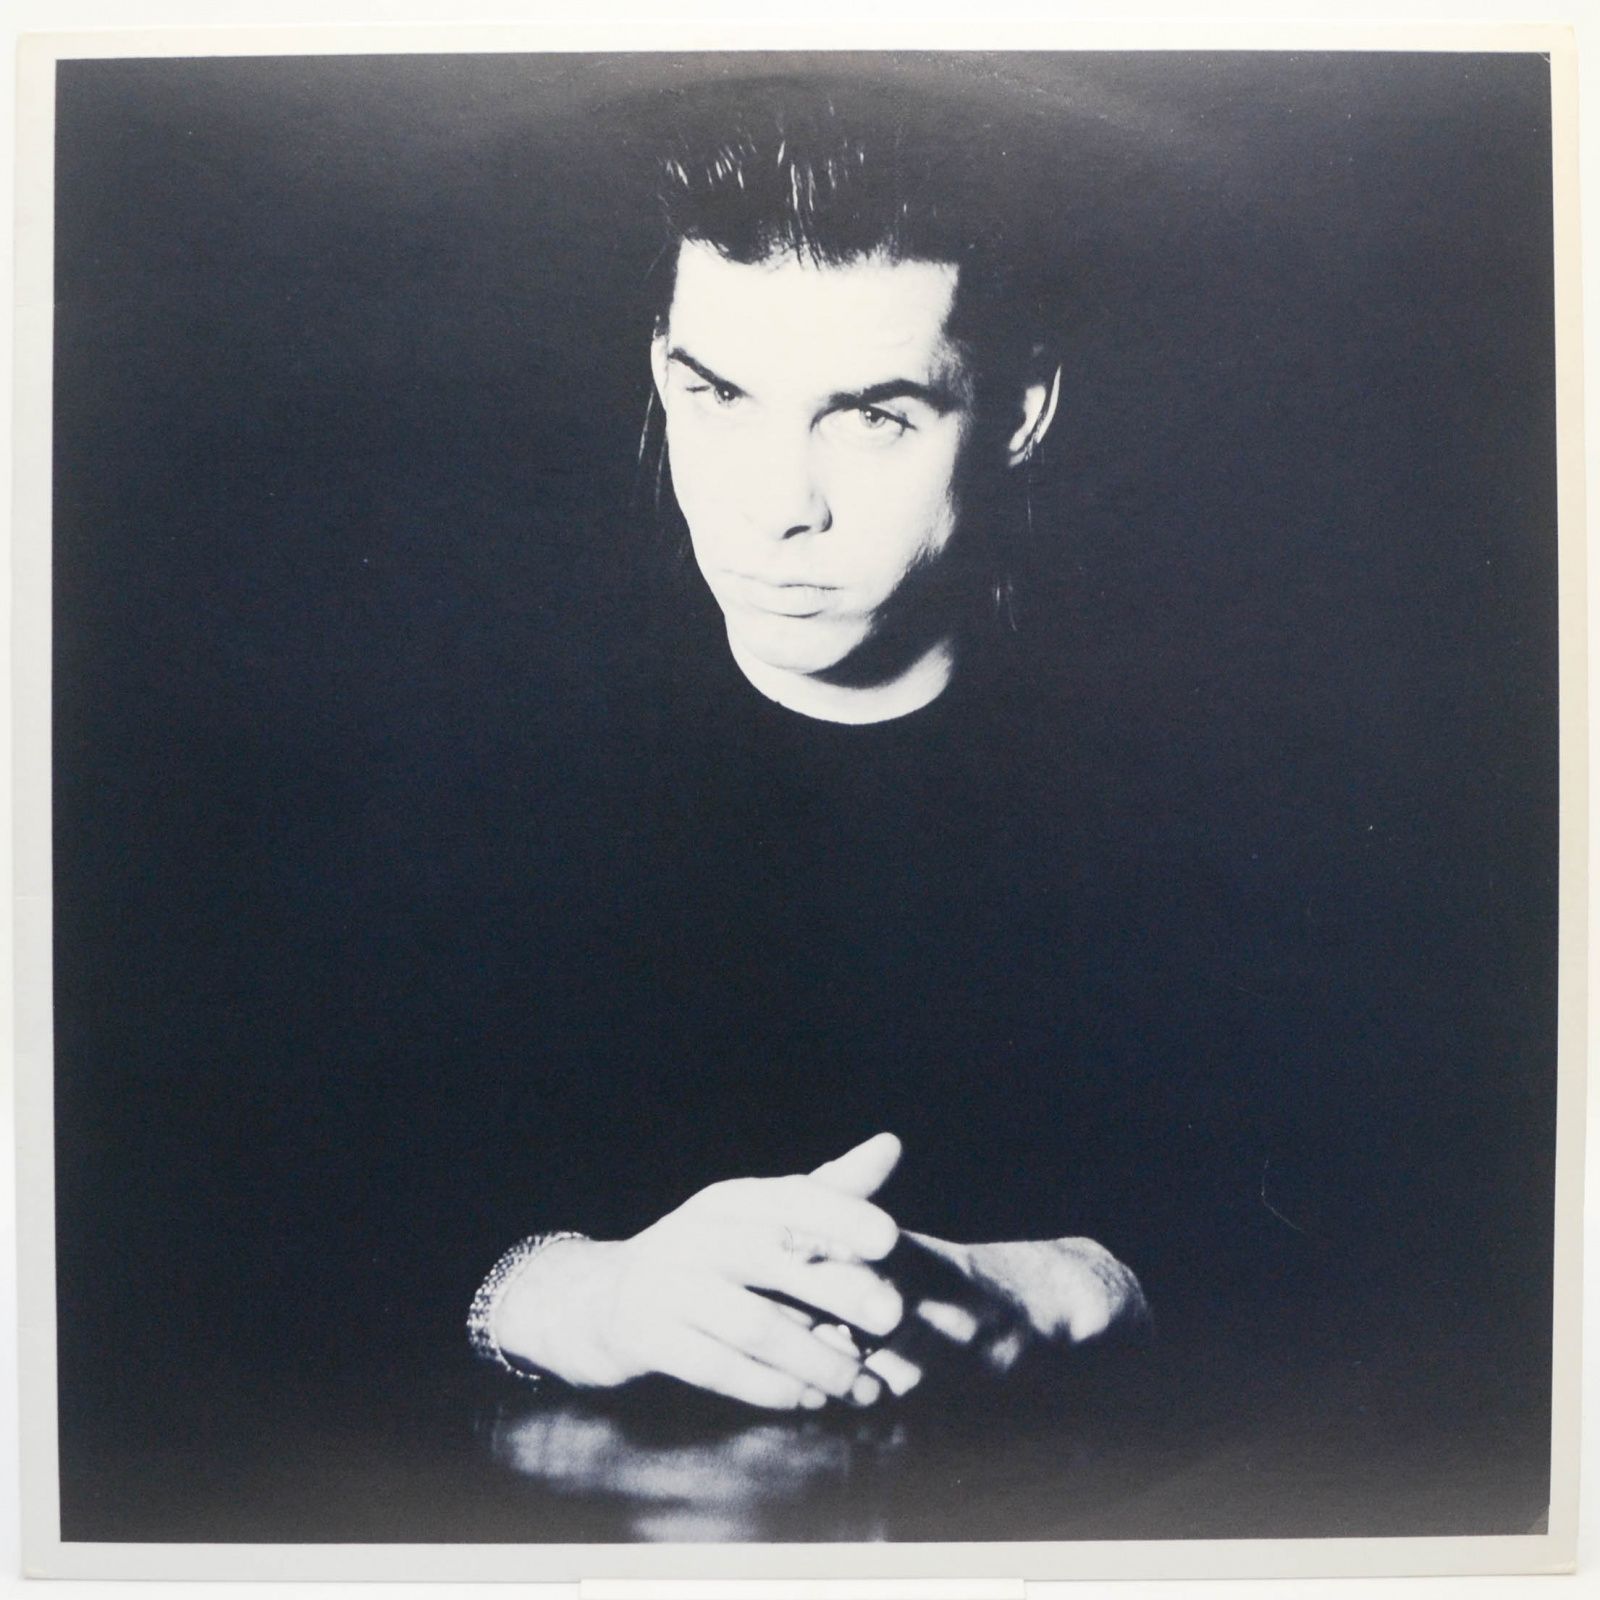 Nick Cave & The Bad Seeds — The Firstborn Is Dead, 1985